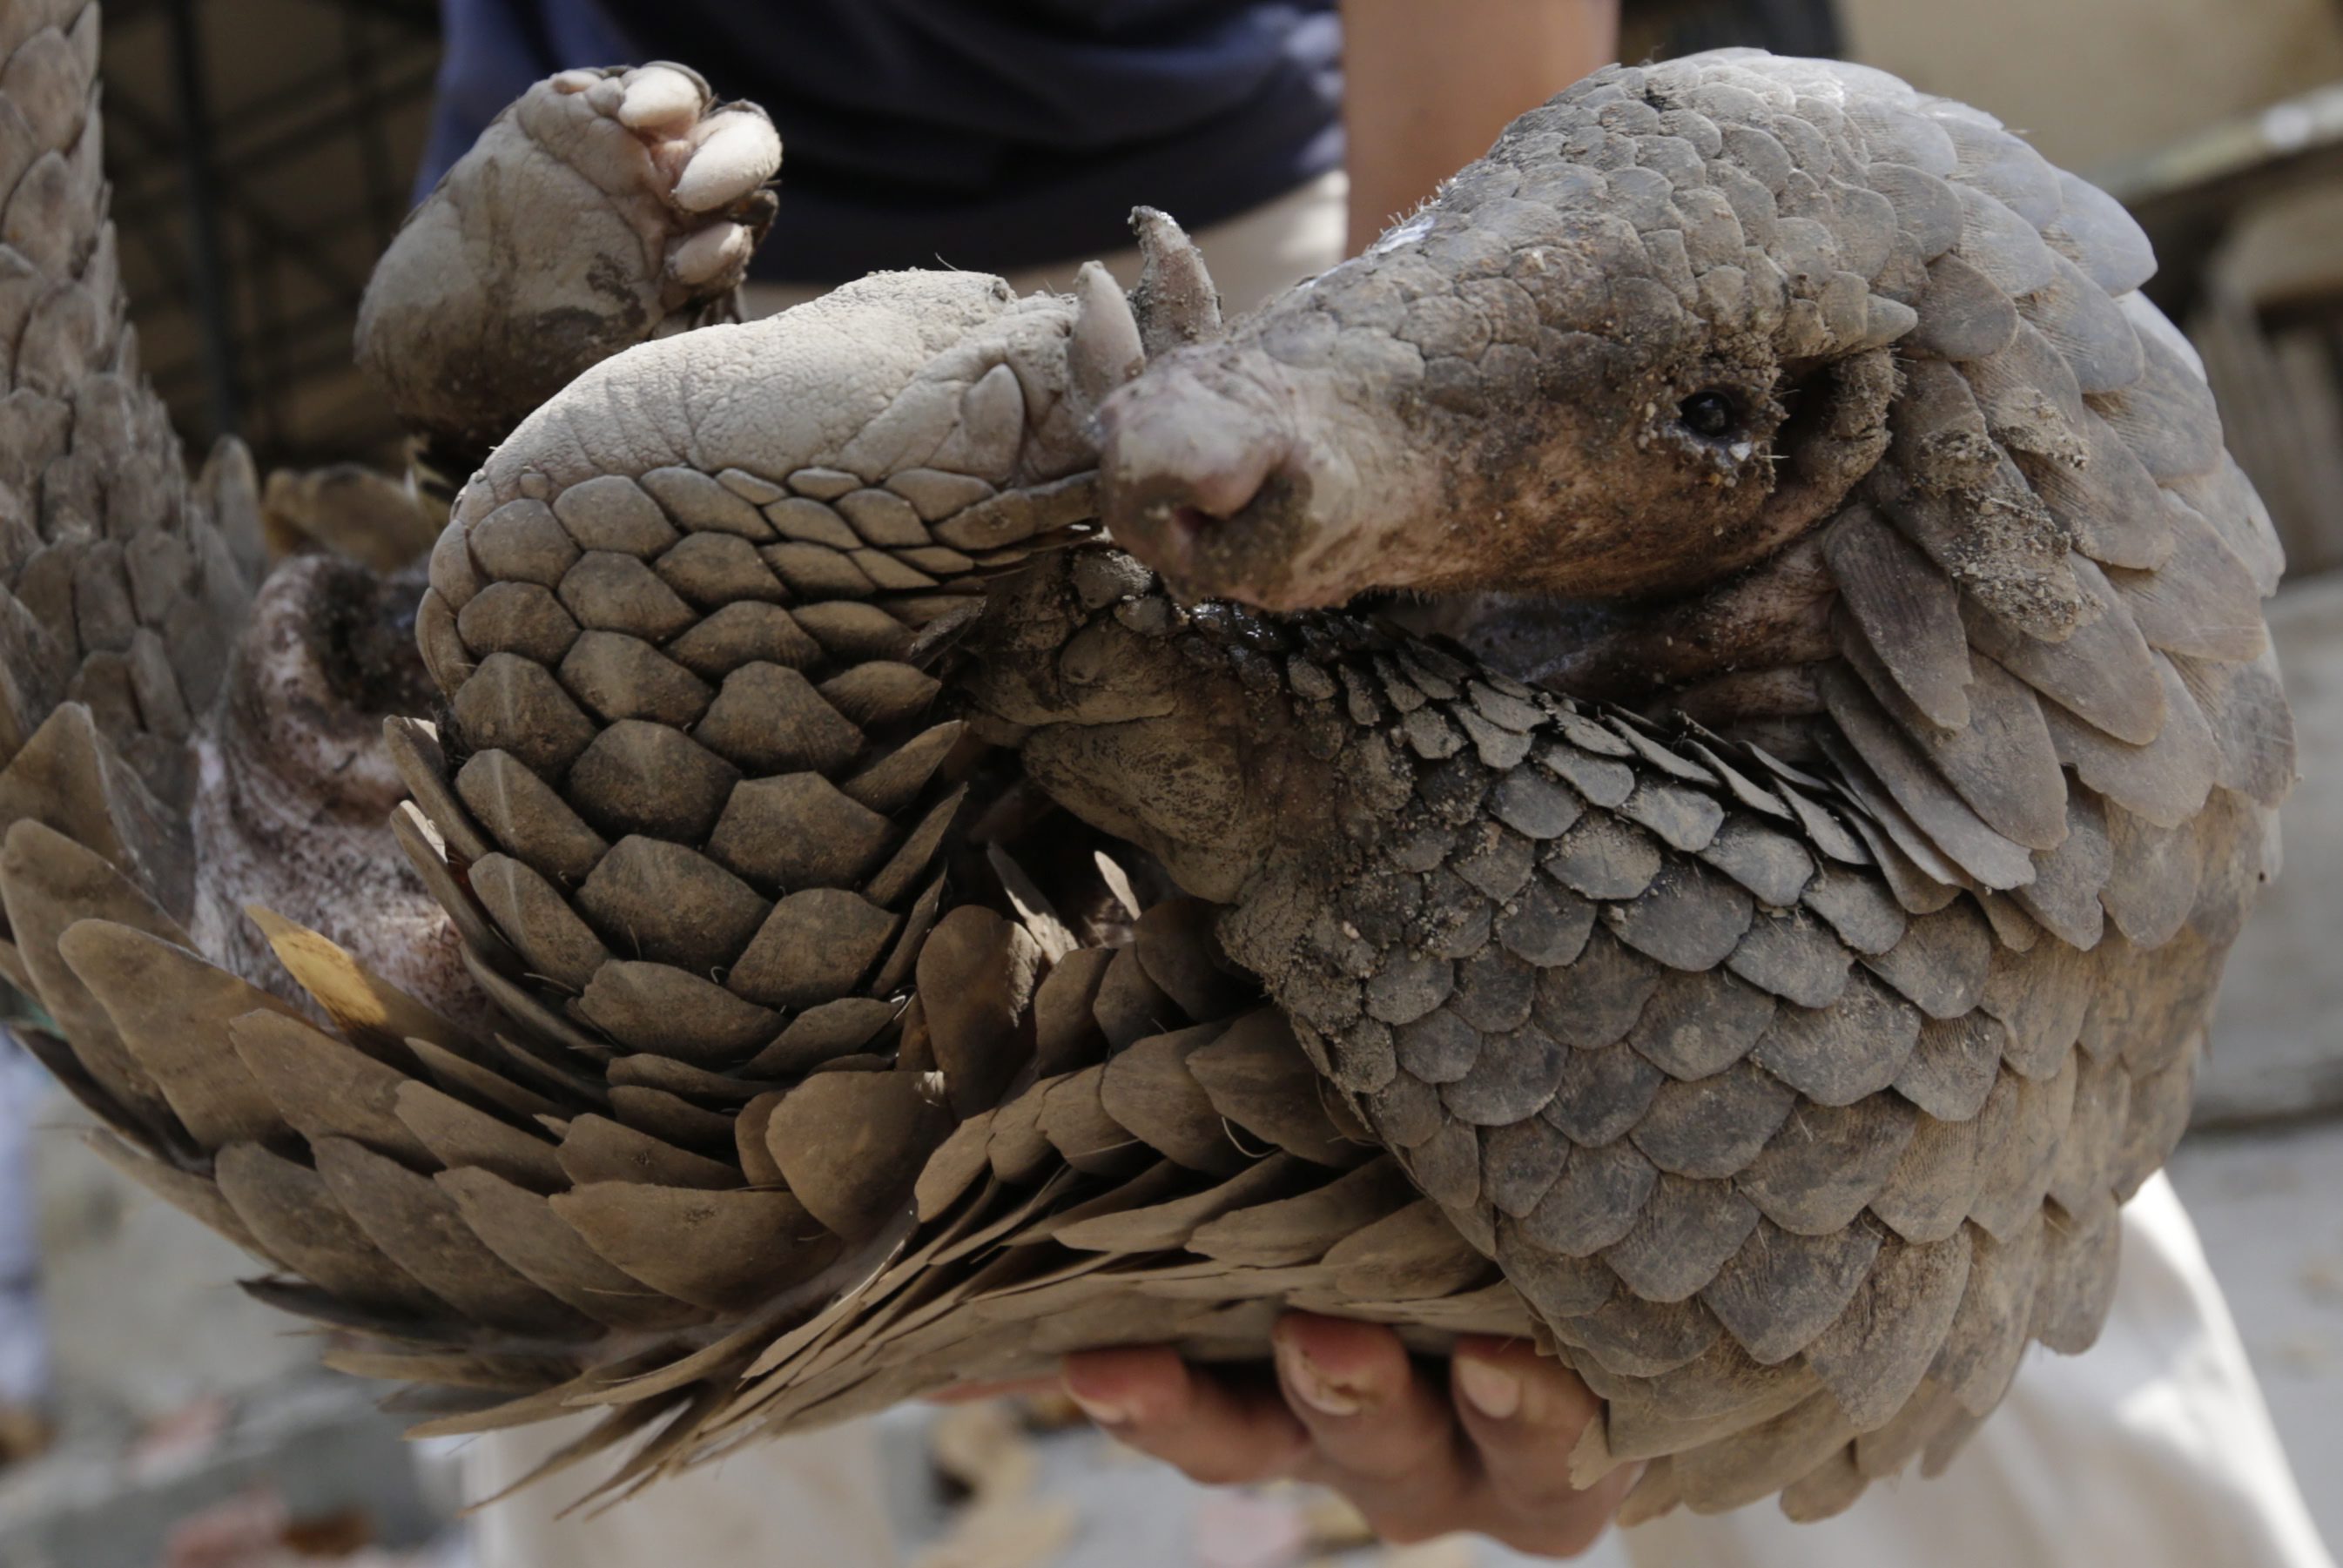 2016-02-20 09:51:18 epa05171525 A Cambodian animal keeper carries a male pangolin at Phnom Tamao Wildlife Rescue Center in Takeo province, Cambodia, 20 February 2016. The world marks the annual Pangolin Day on 20 February to raise awareness for pangolin conservation, as they estimated that every year about 10,000 pangolins are trafficked. EPA/MAK REMISSA